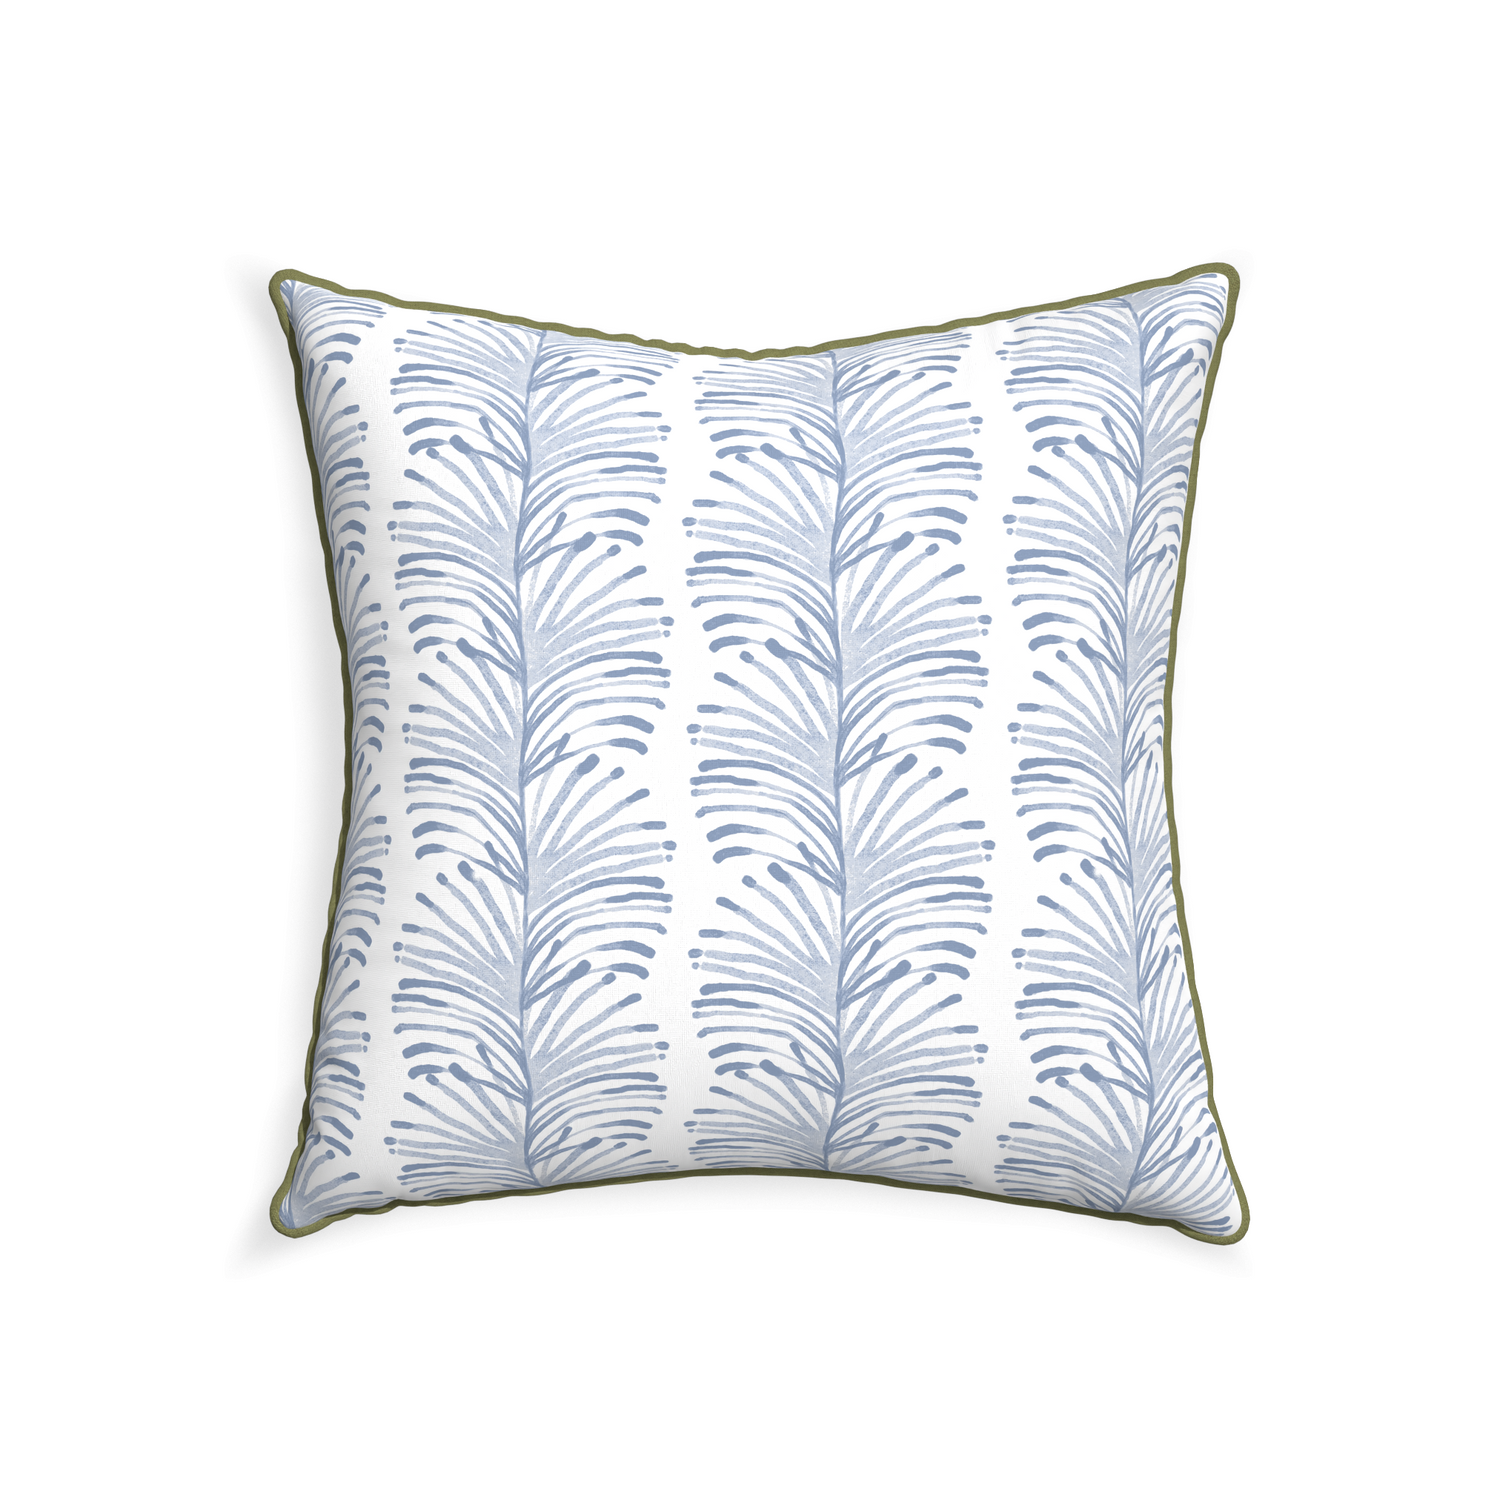 22-square emma sky custom sky blue botanical stripepillow with moss piping on white background